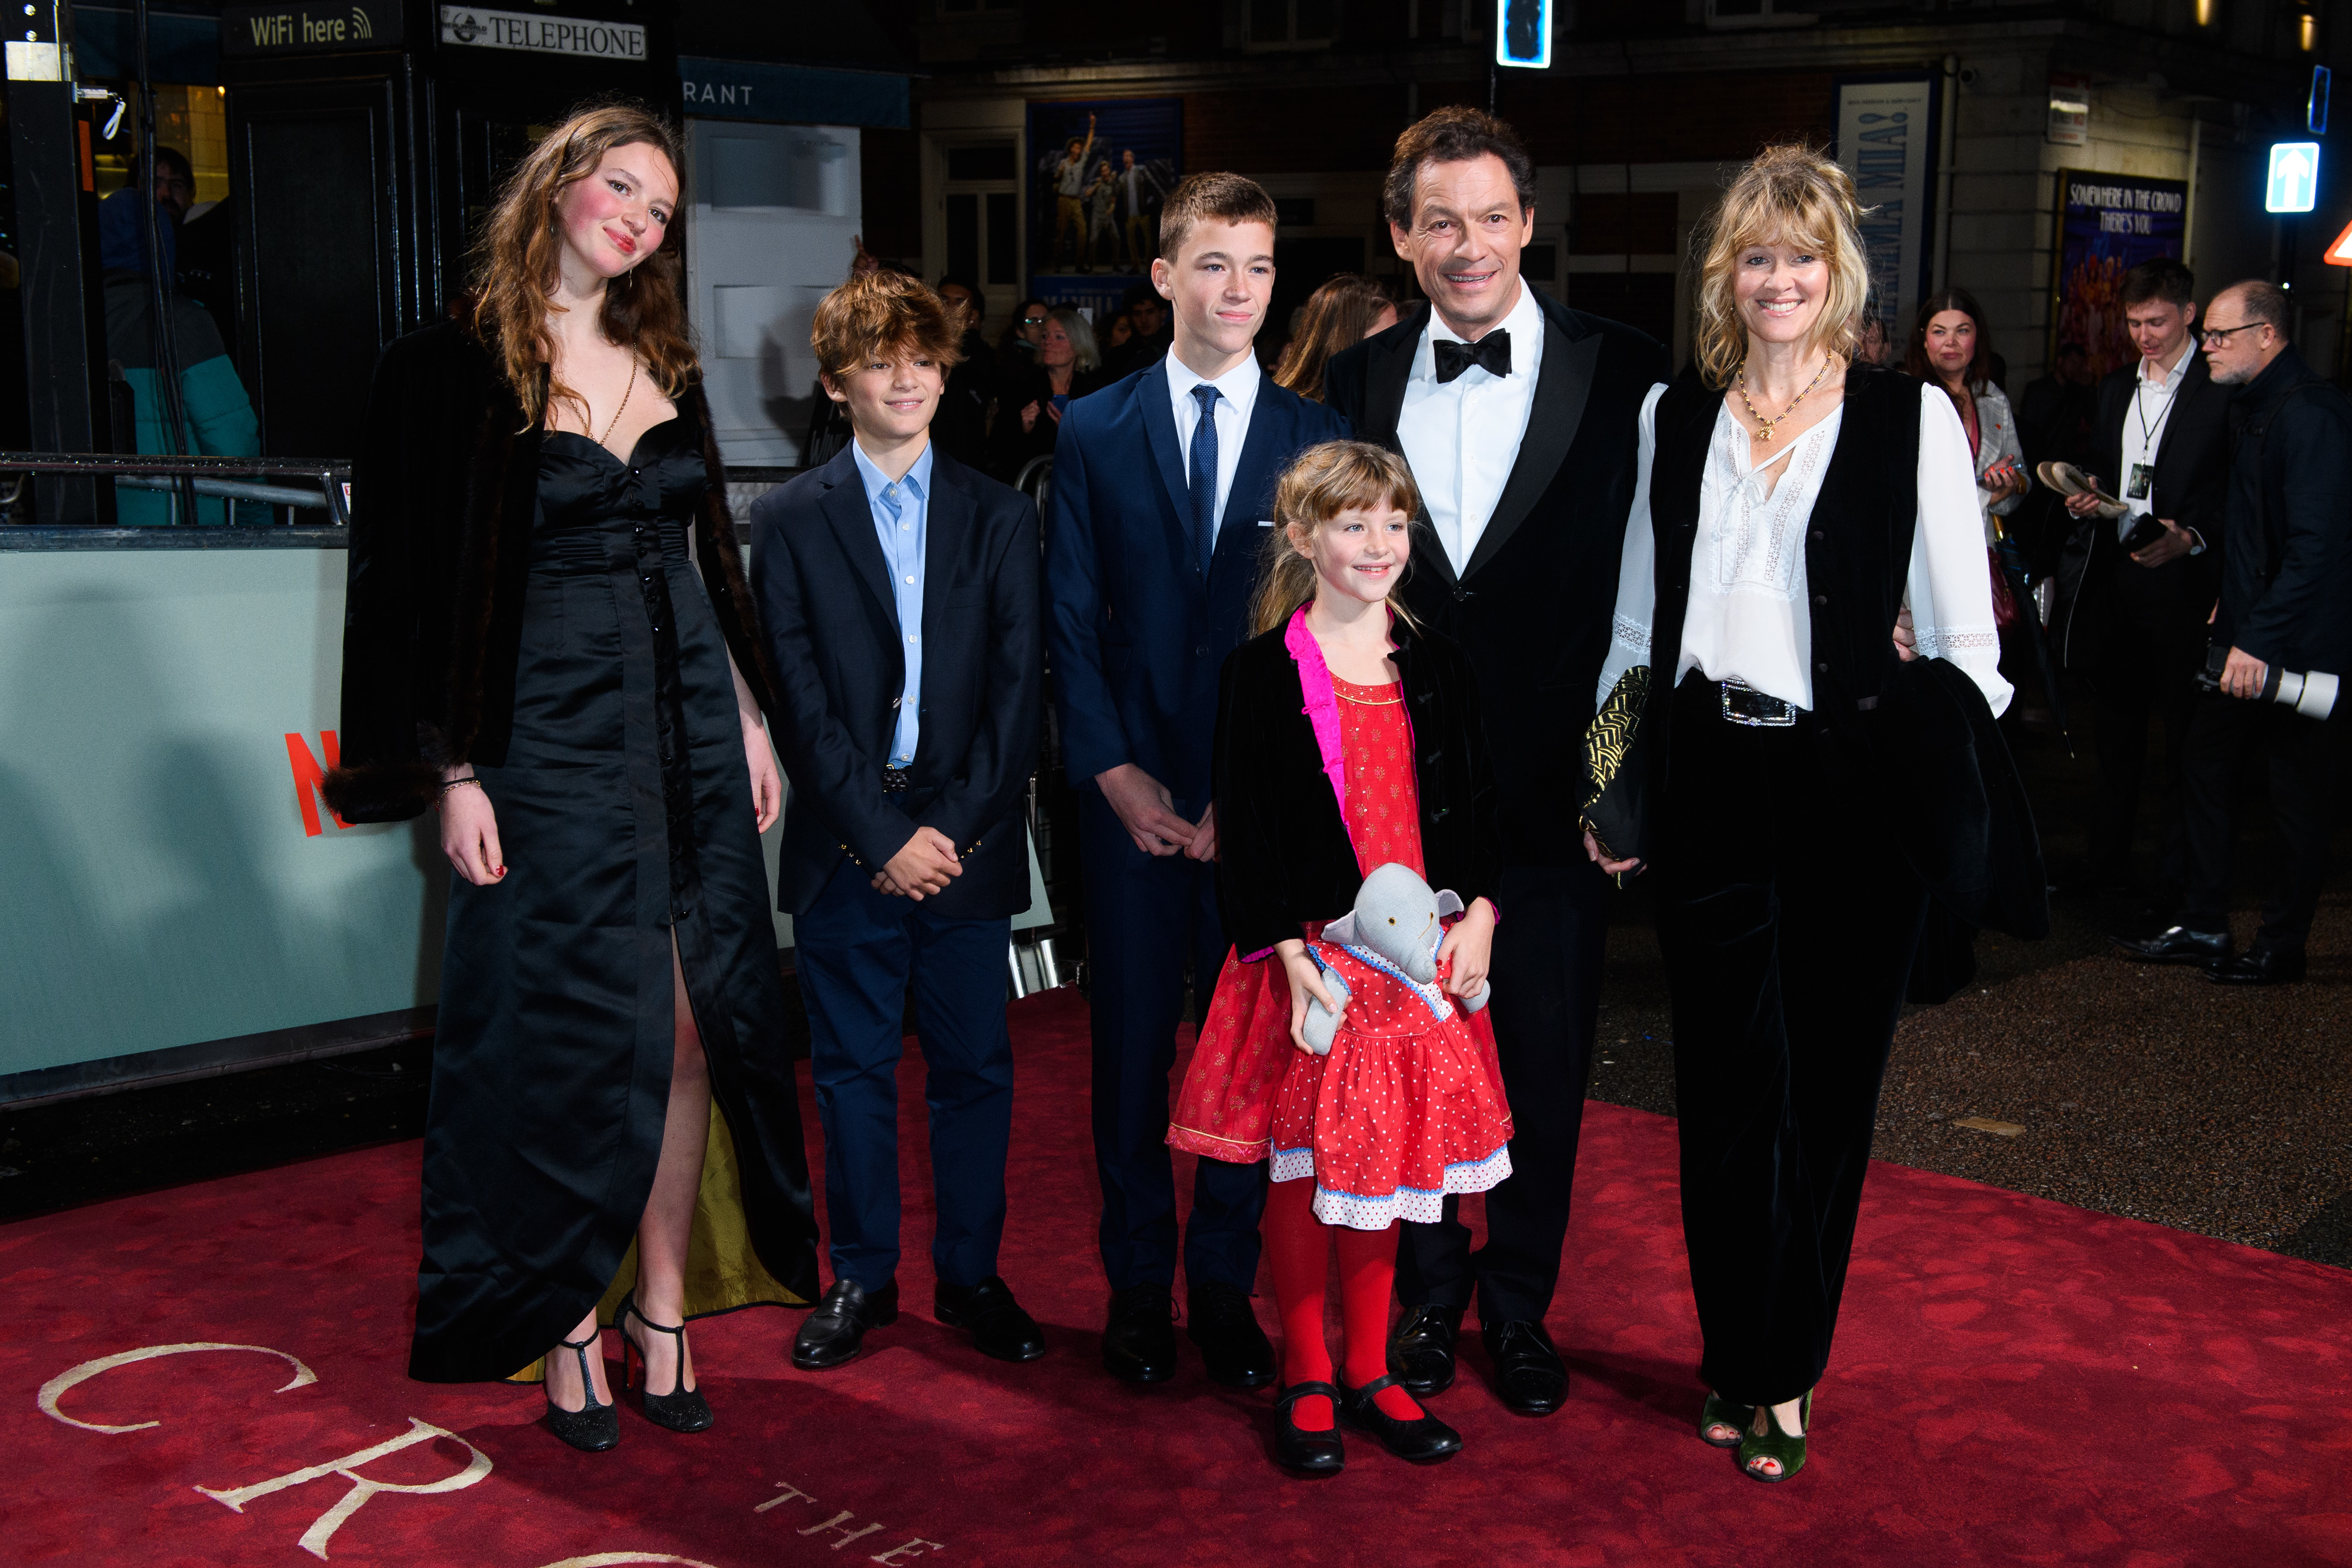 Dominic with his family on the red carpet